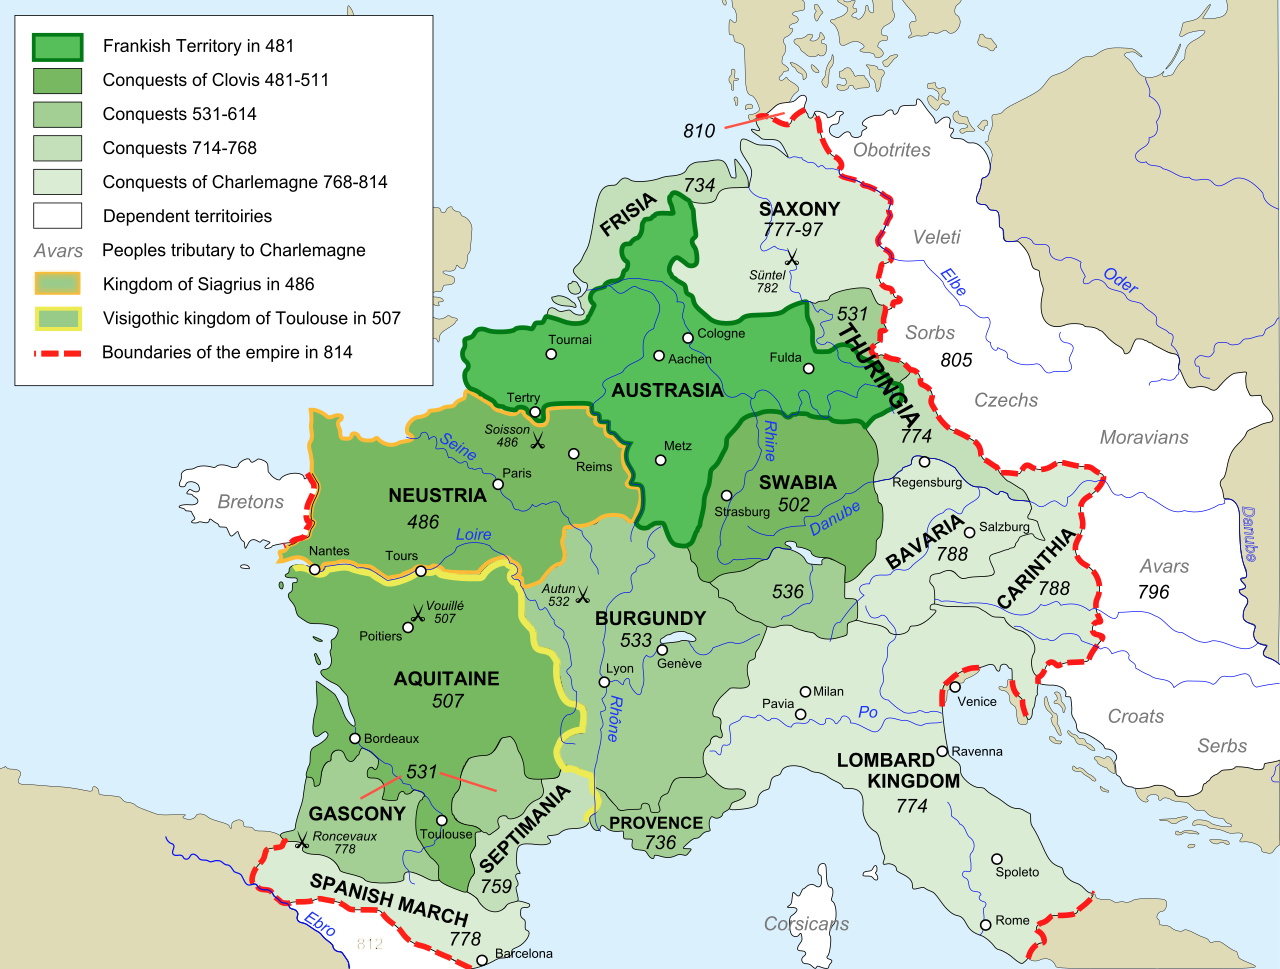 Map of the Frankish Kingdom (for reference)